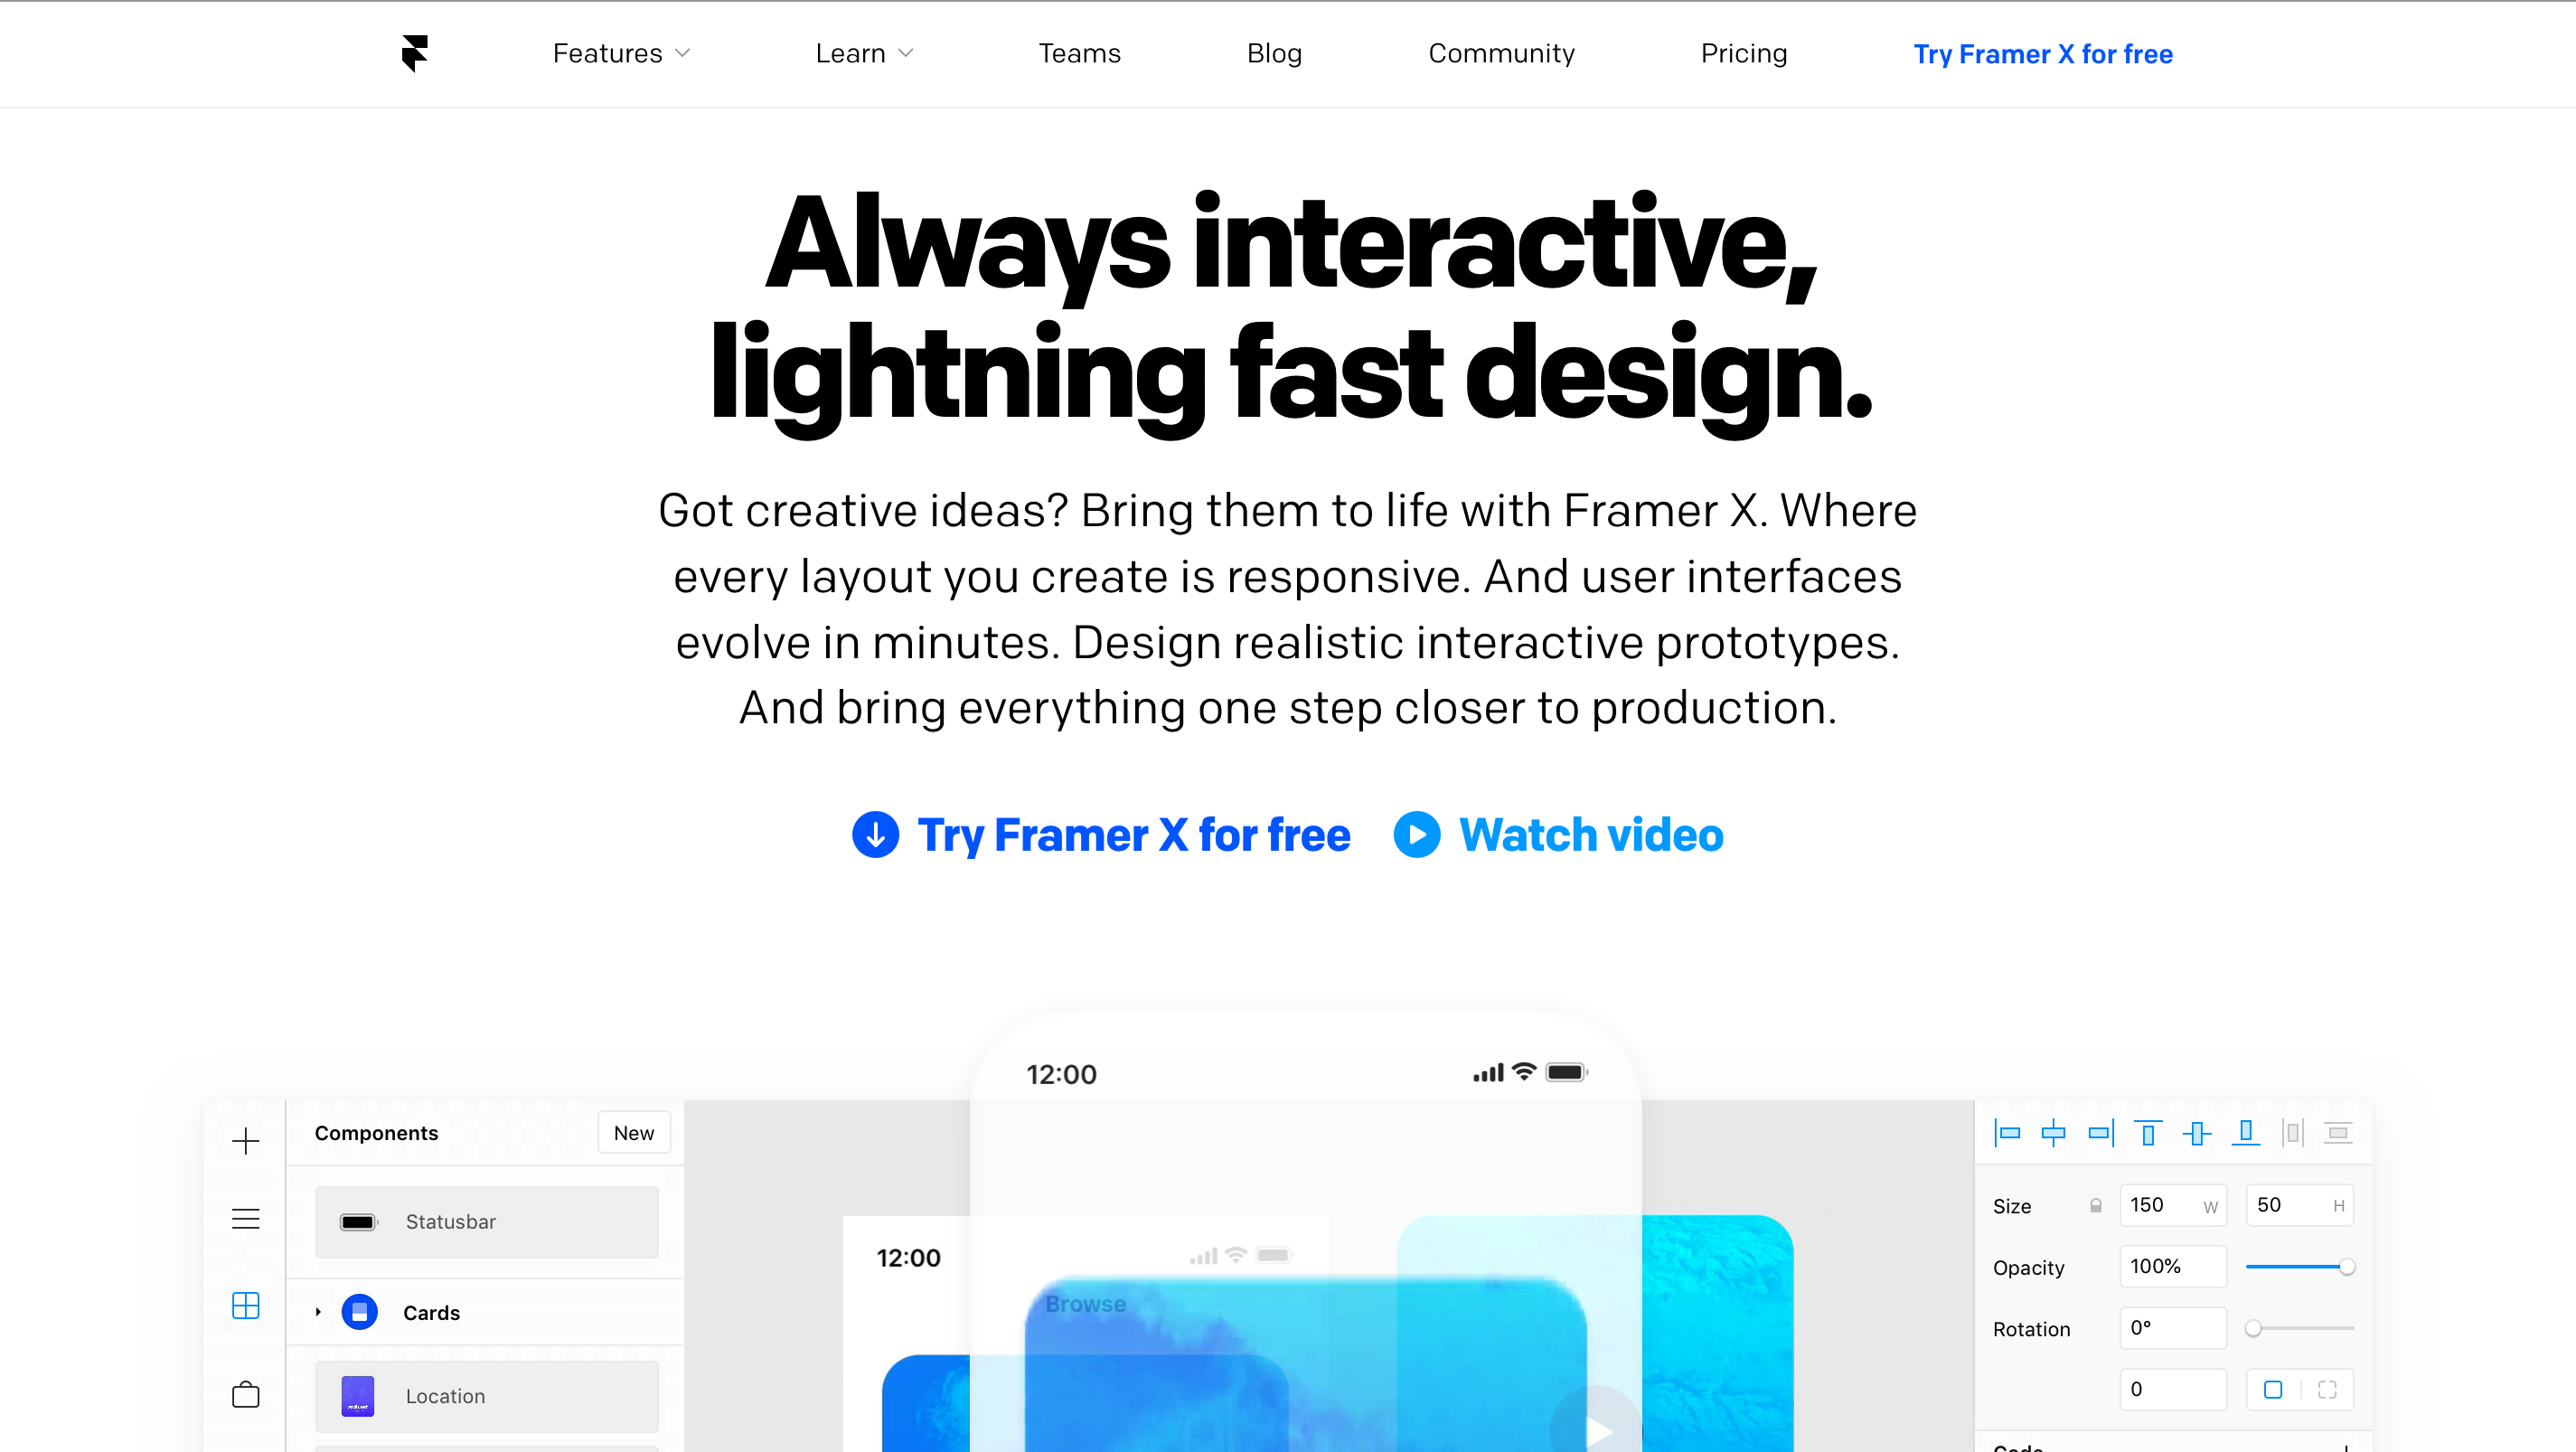 Framer’s website in 2019, showing that it was a prototyping tool and not a website publishing platform.